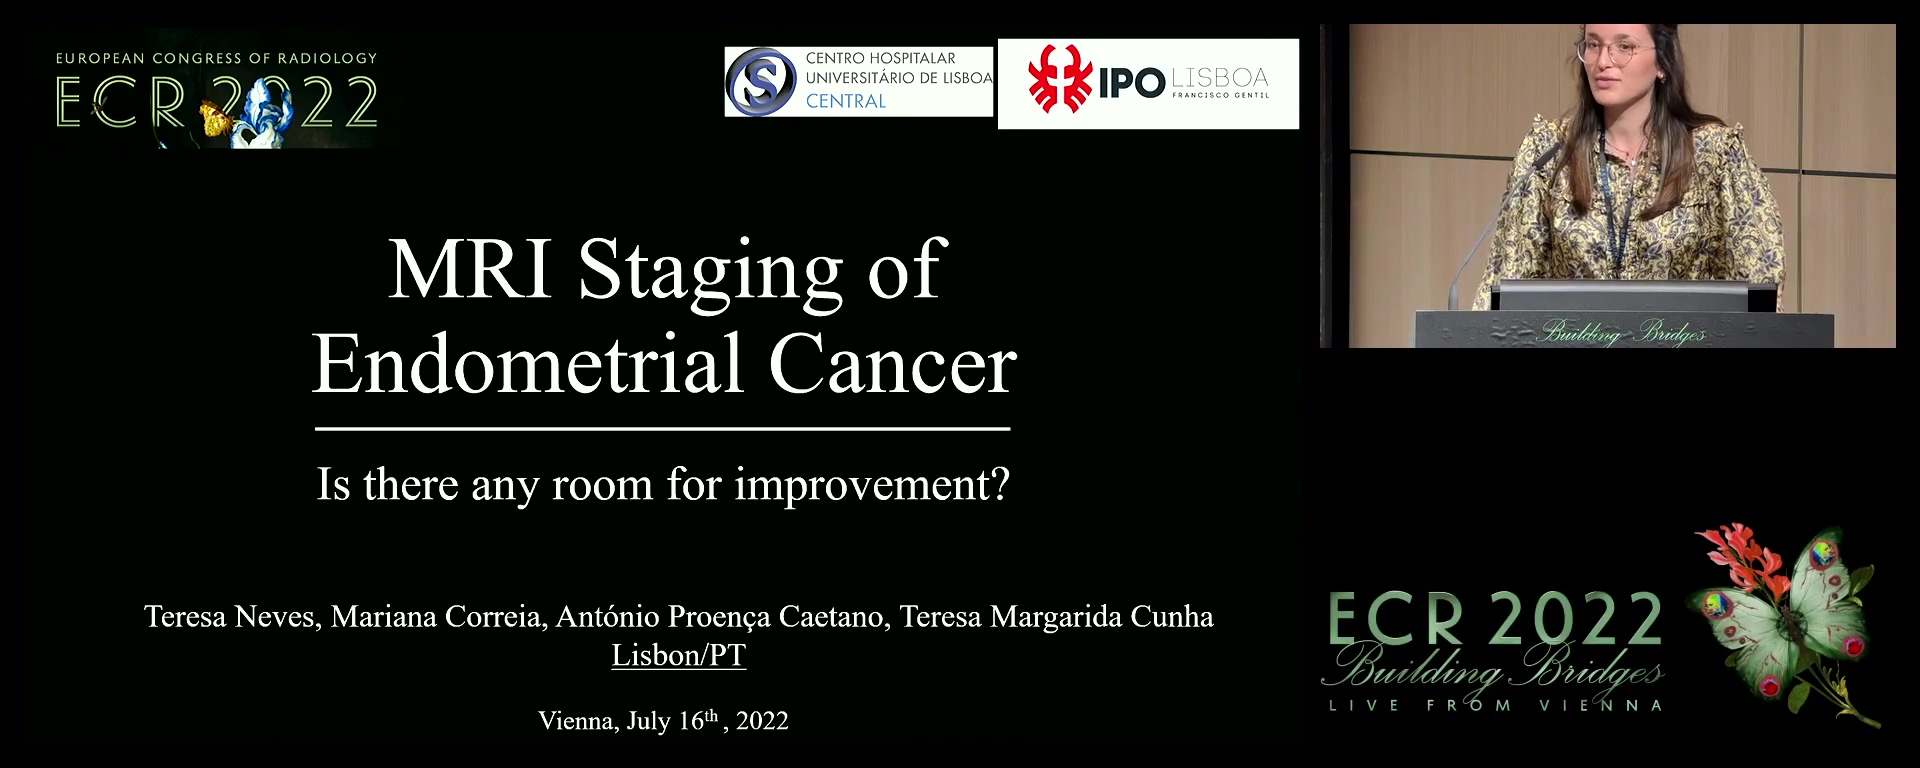 MRI staging of endometrial cancer: is there any room for improvement?